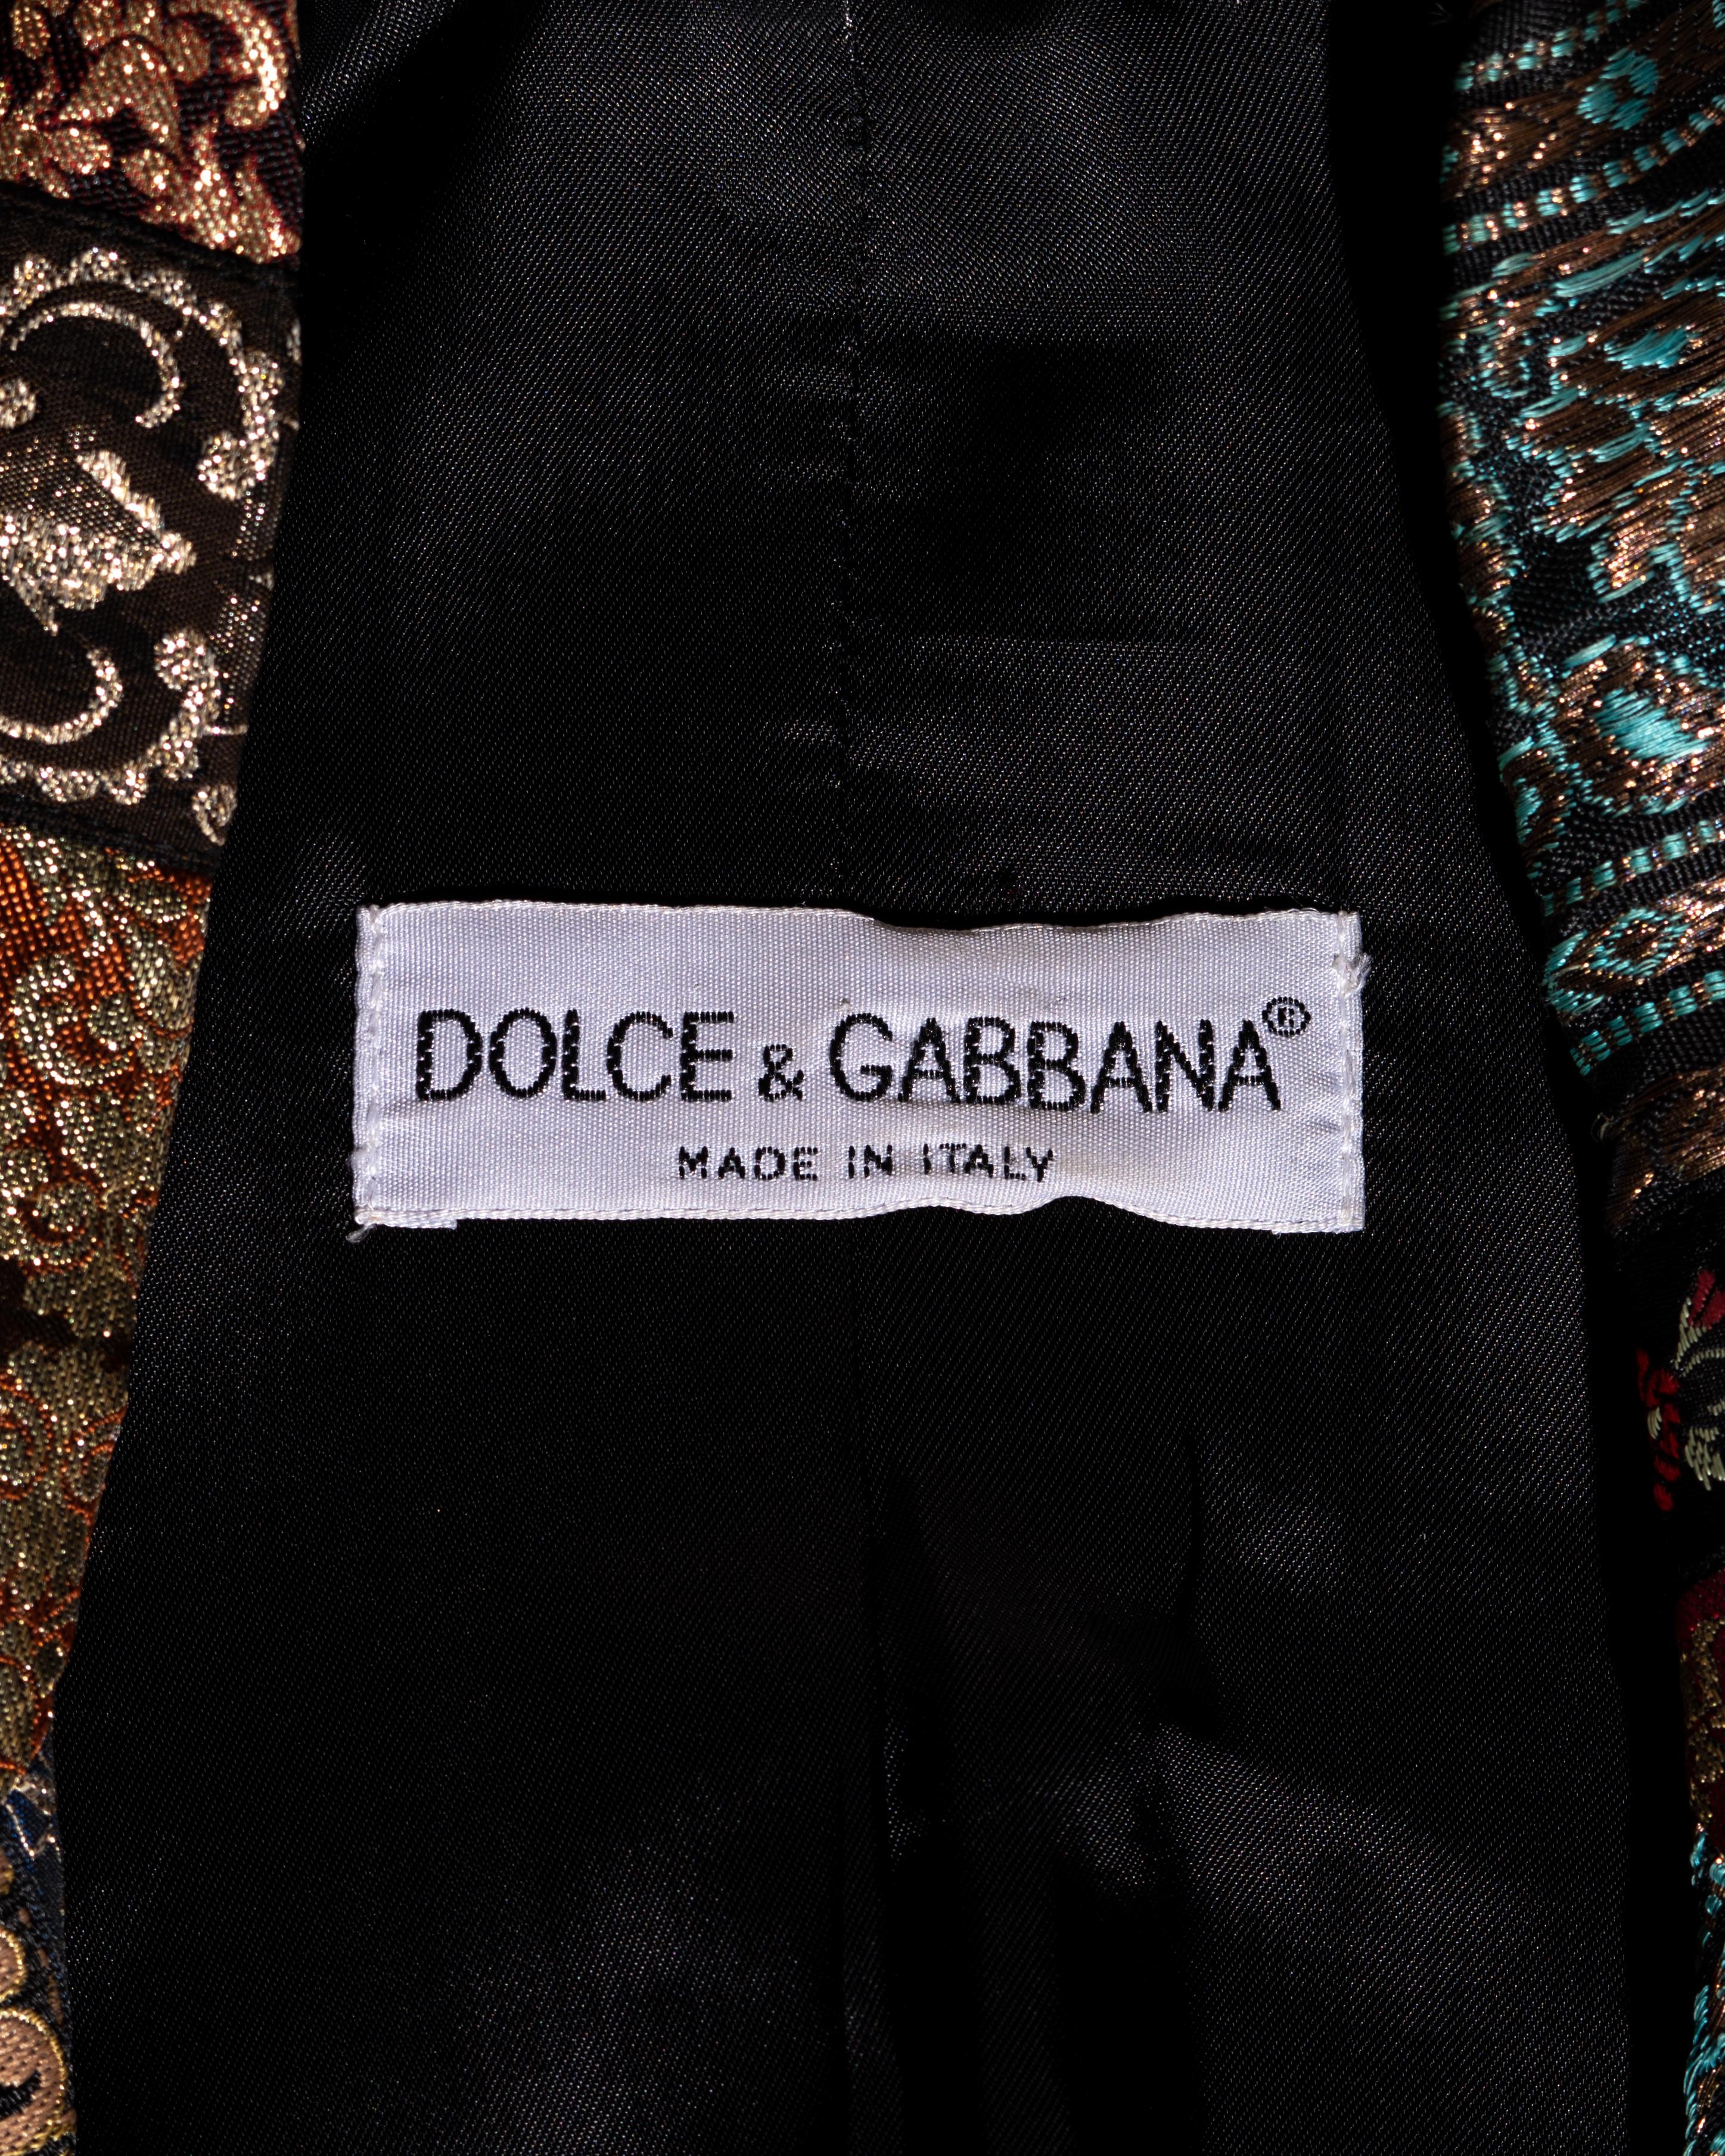 Dolce & Gabbana lamé brocade double-breasted blazer jacket, ss 1993 For Sale 4